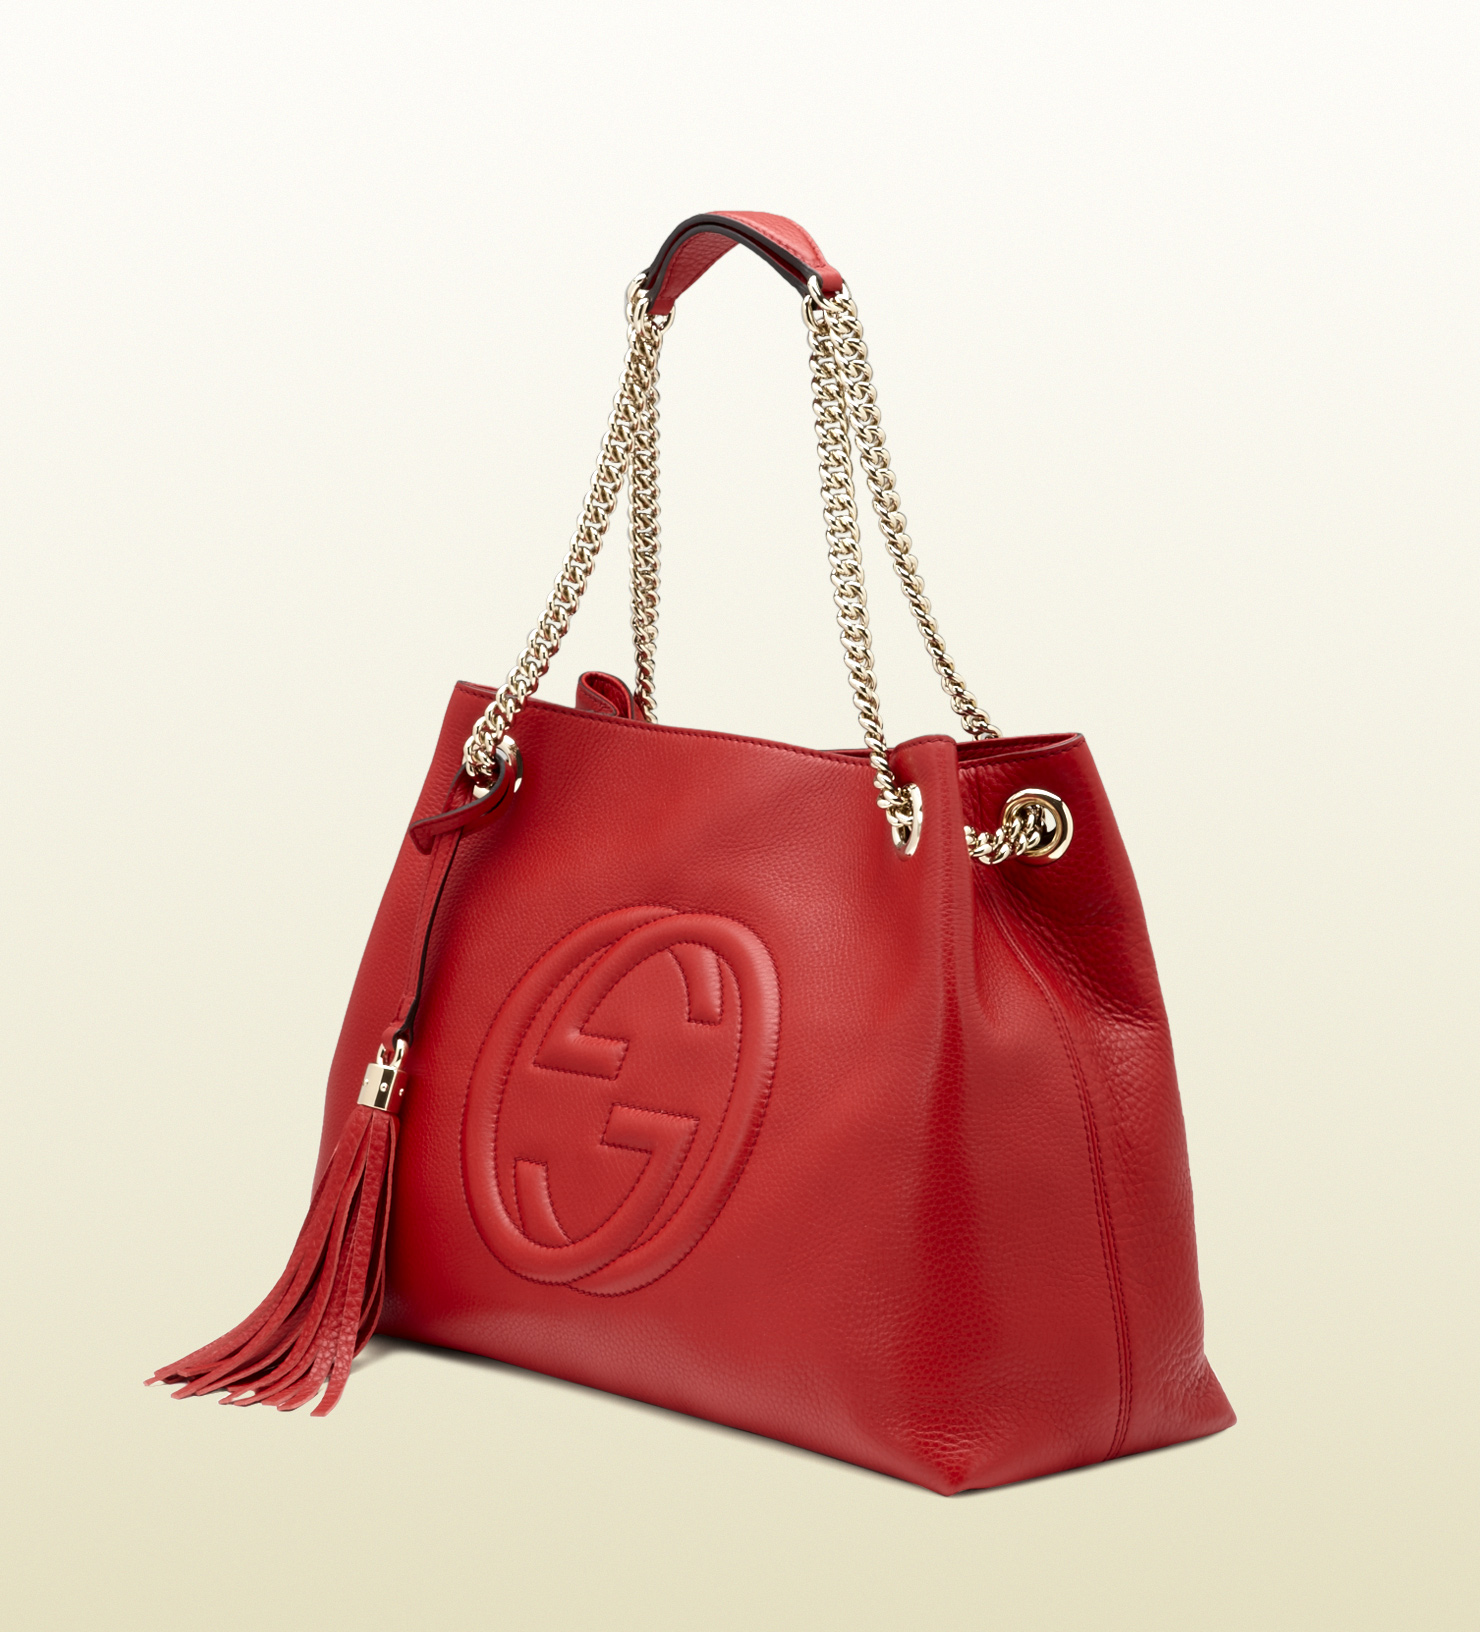 Lyst - Gucci Soho Leather Shoulder Bag in Red